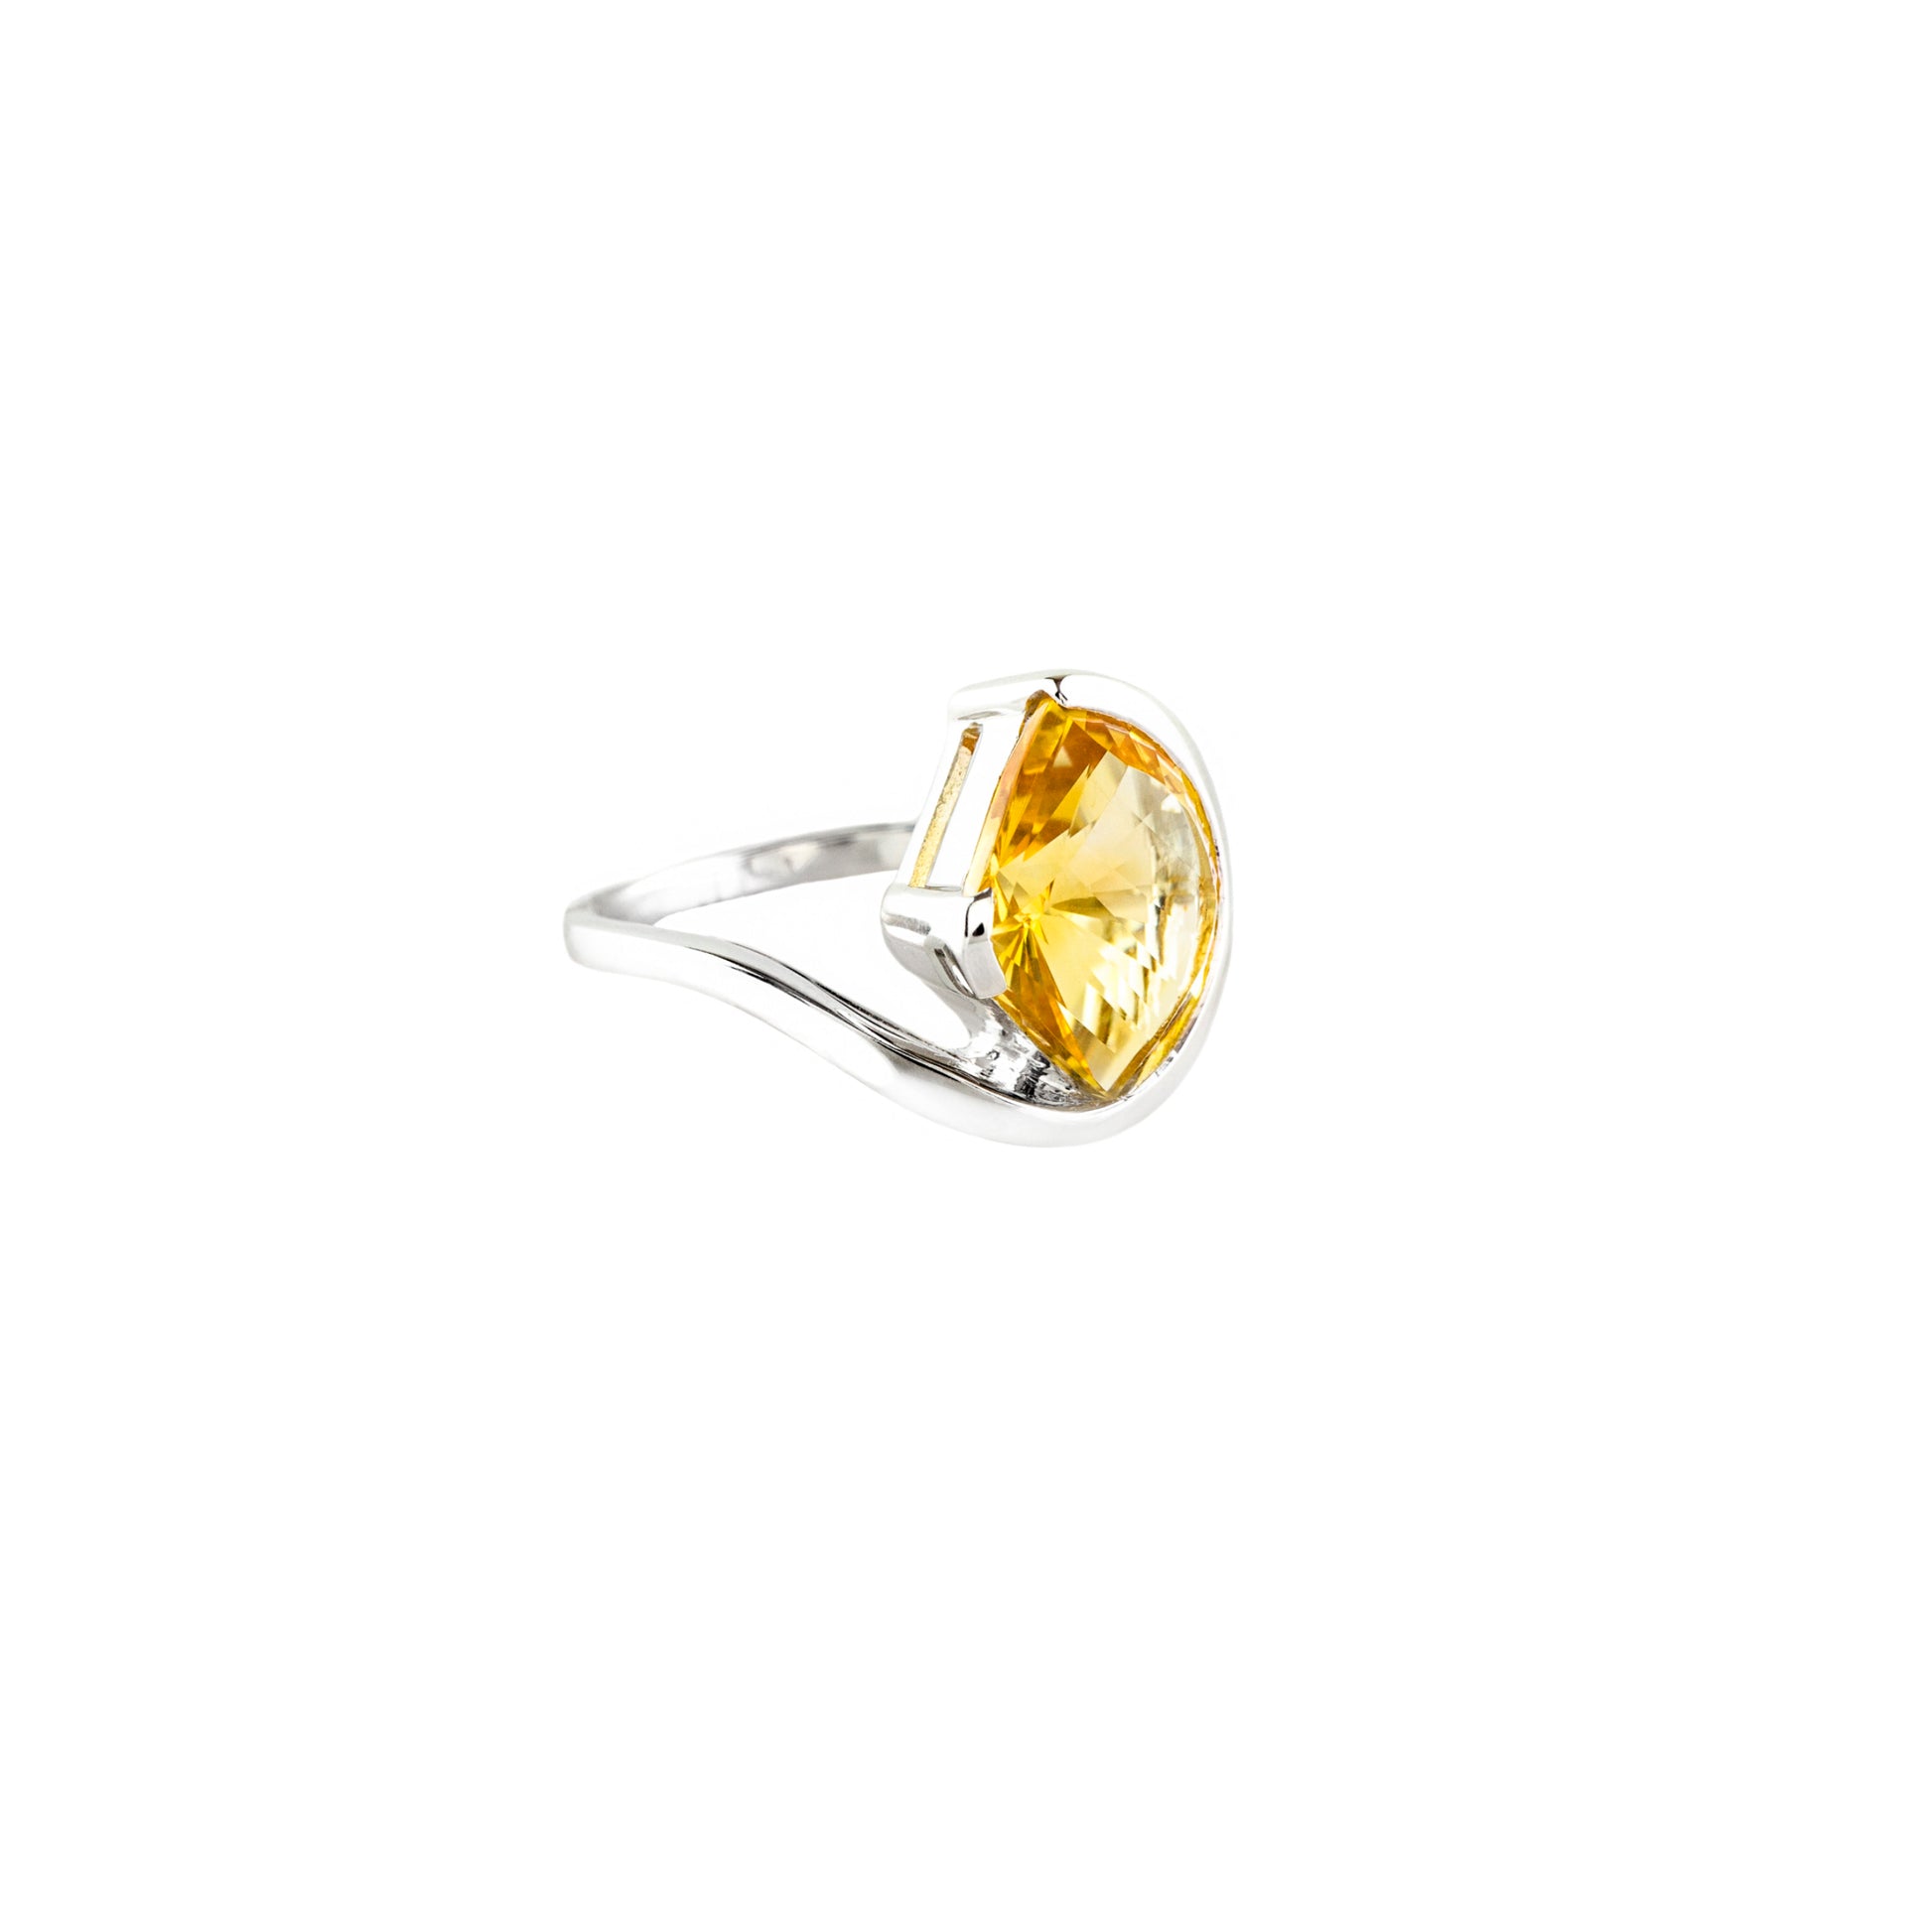 Large Citrine Rhodium Plated Sterling Silver Ring - Twisted Earth Artistry